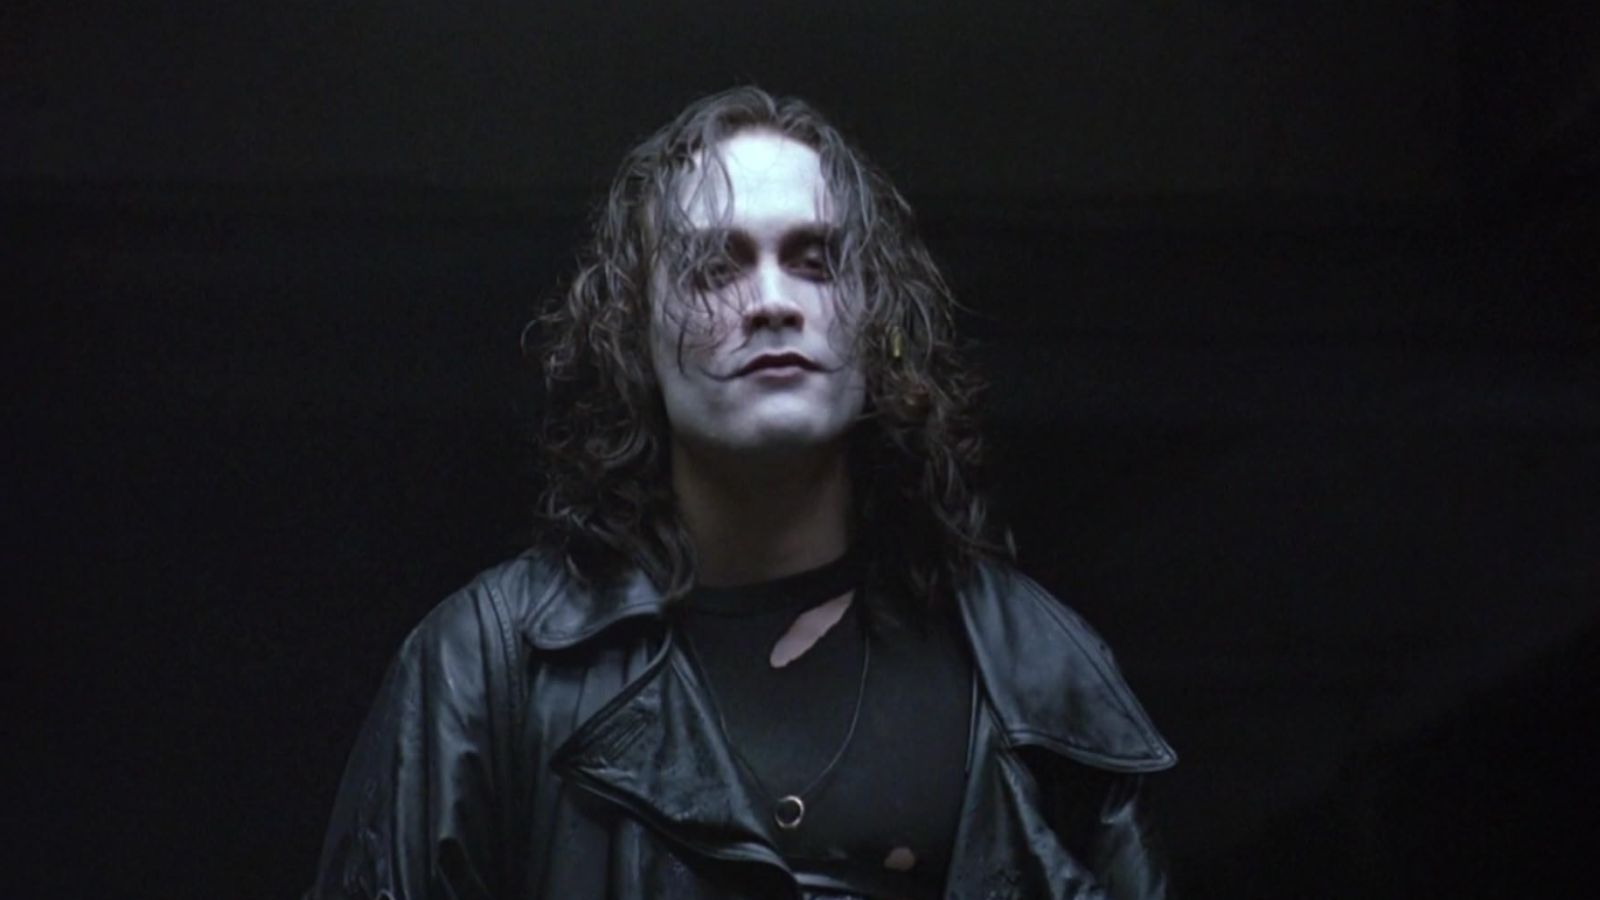 A rock musician who was murdered is brought back to life to avenge his and his fiancée’s deaths, becoming the city’s vigilante in its battle against crime. Brandon Lee died during filming after being shot by the prop gun, but the producers decided to go ahead with the movie’s release, rewriting several scenes.